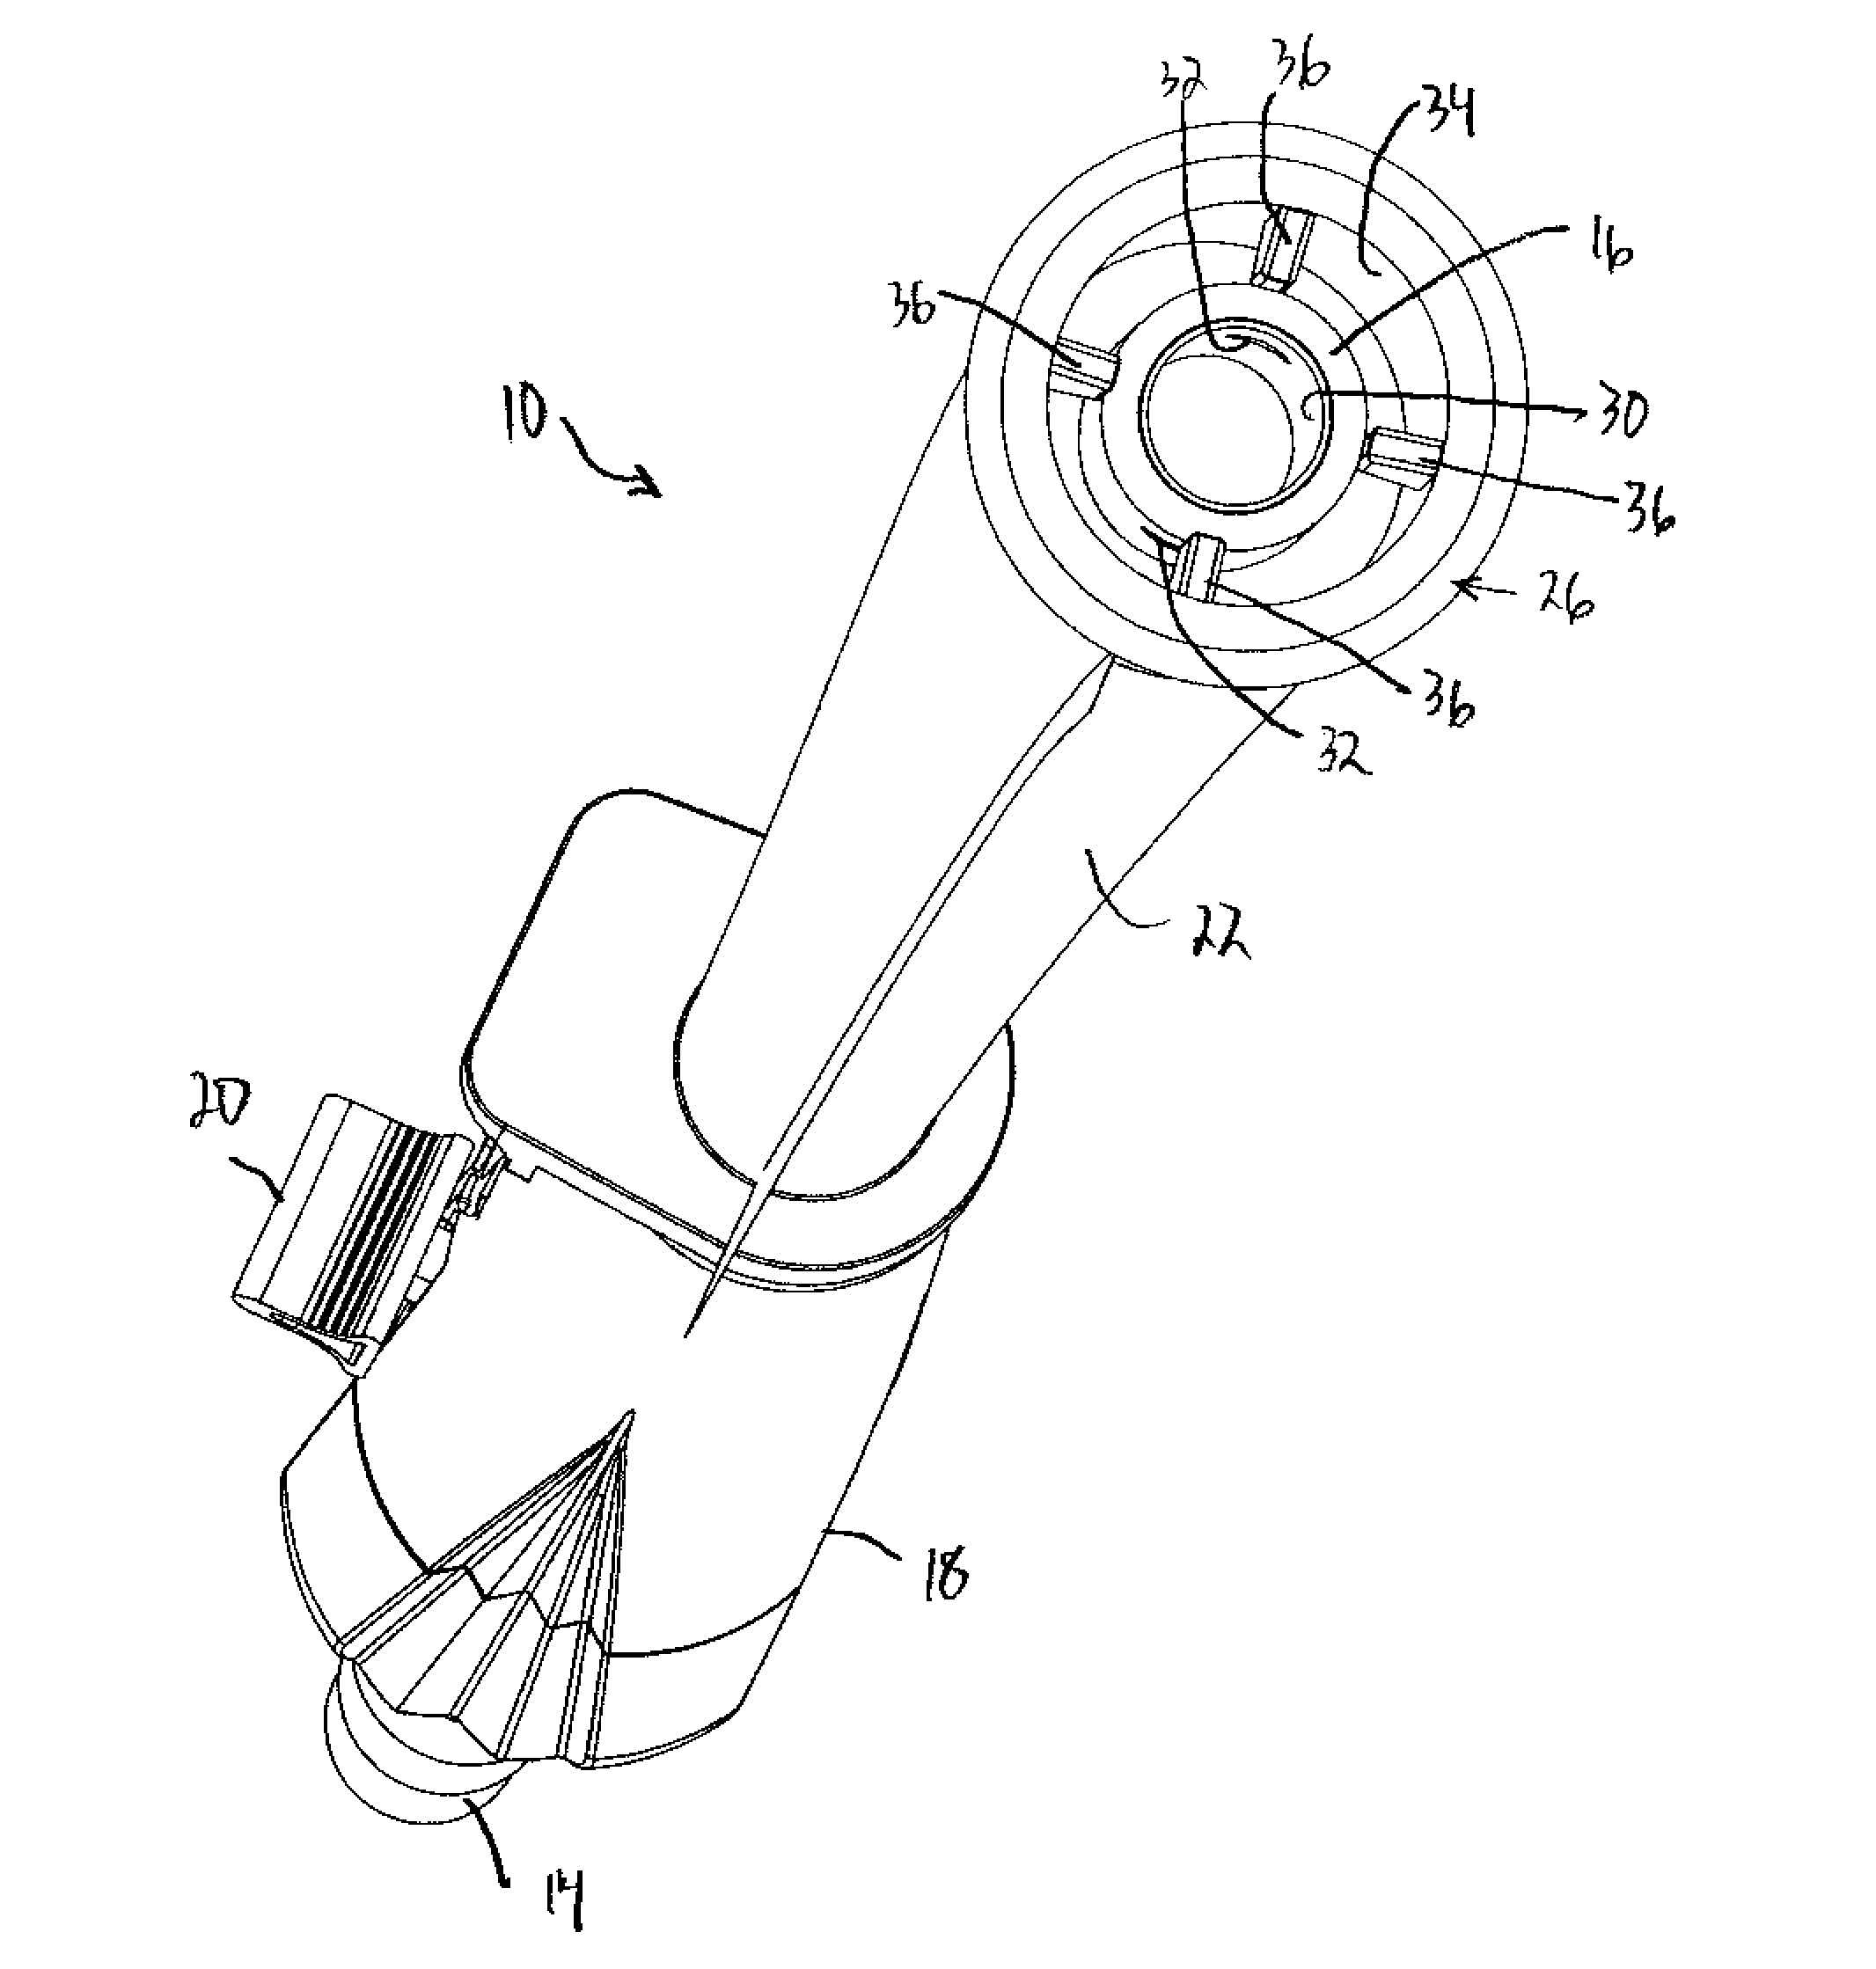 Covered suction device